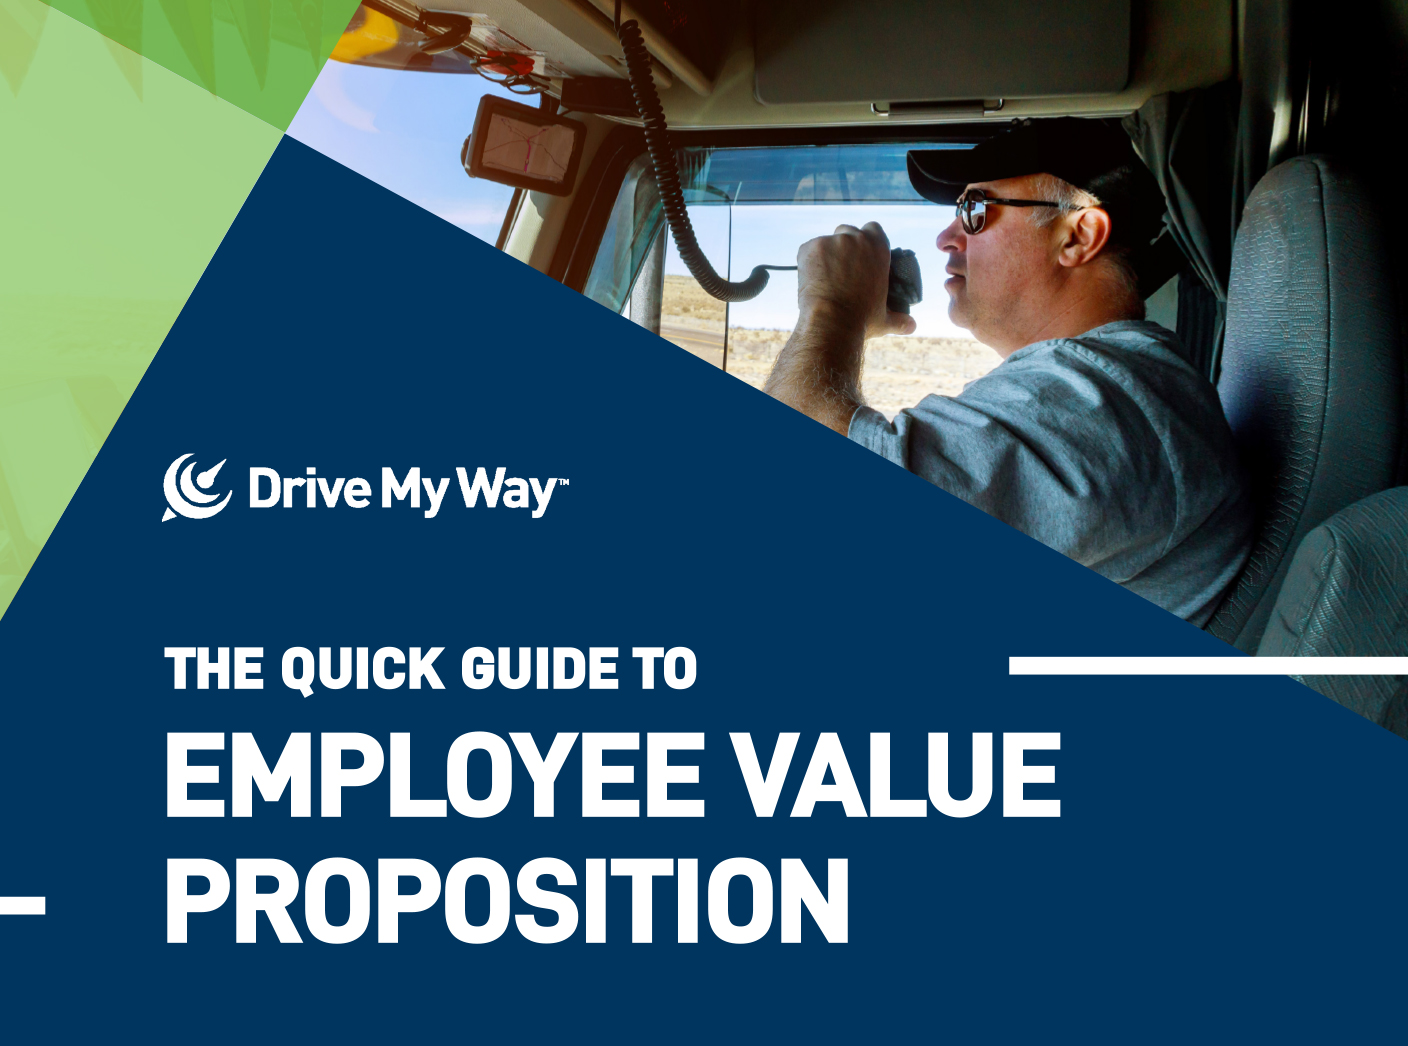 The Quick Guide to Employee Value Proposition